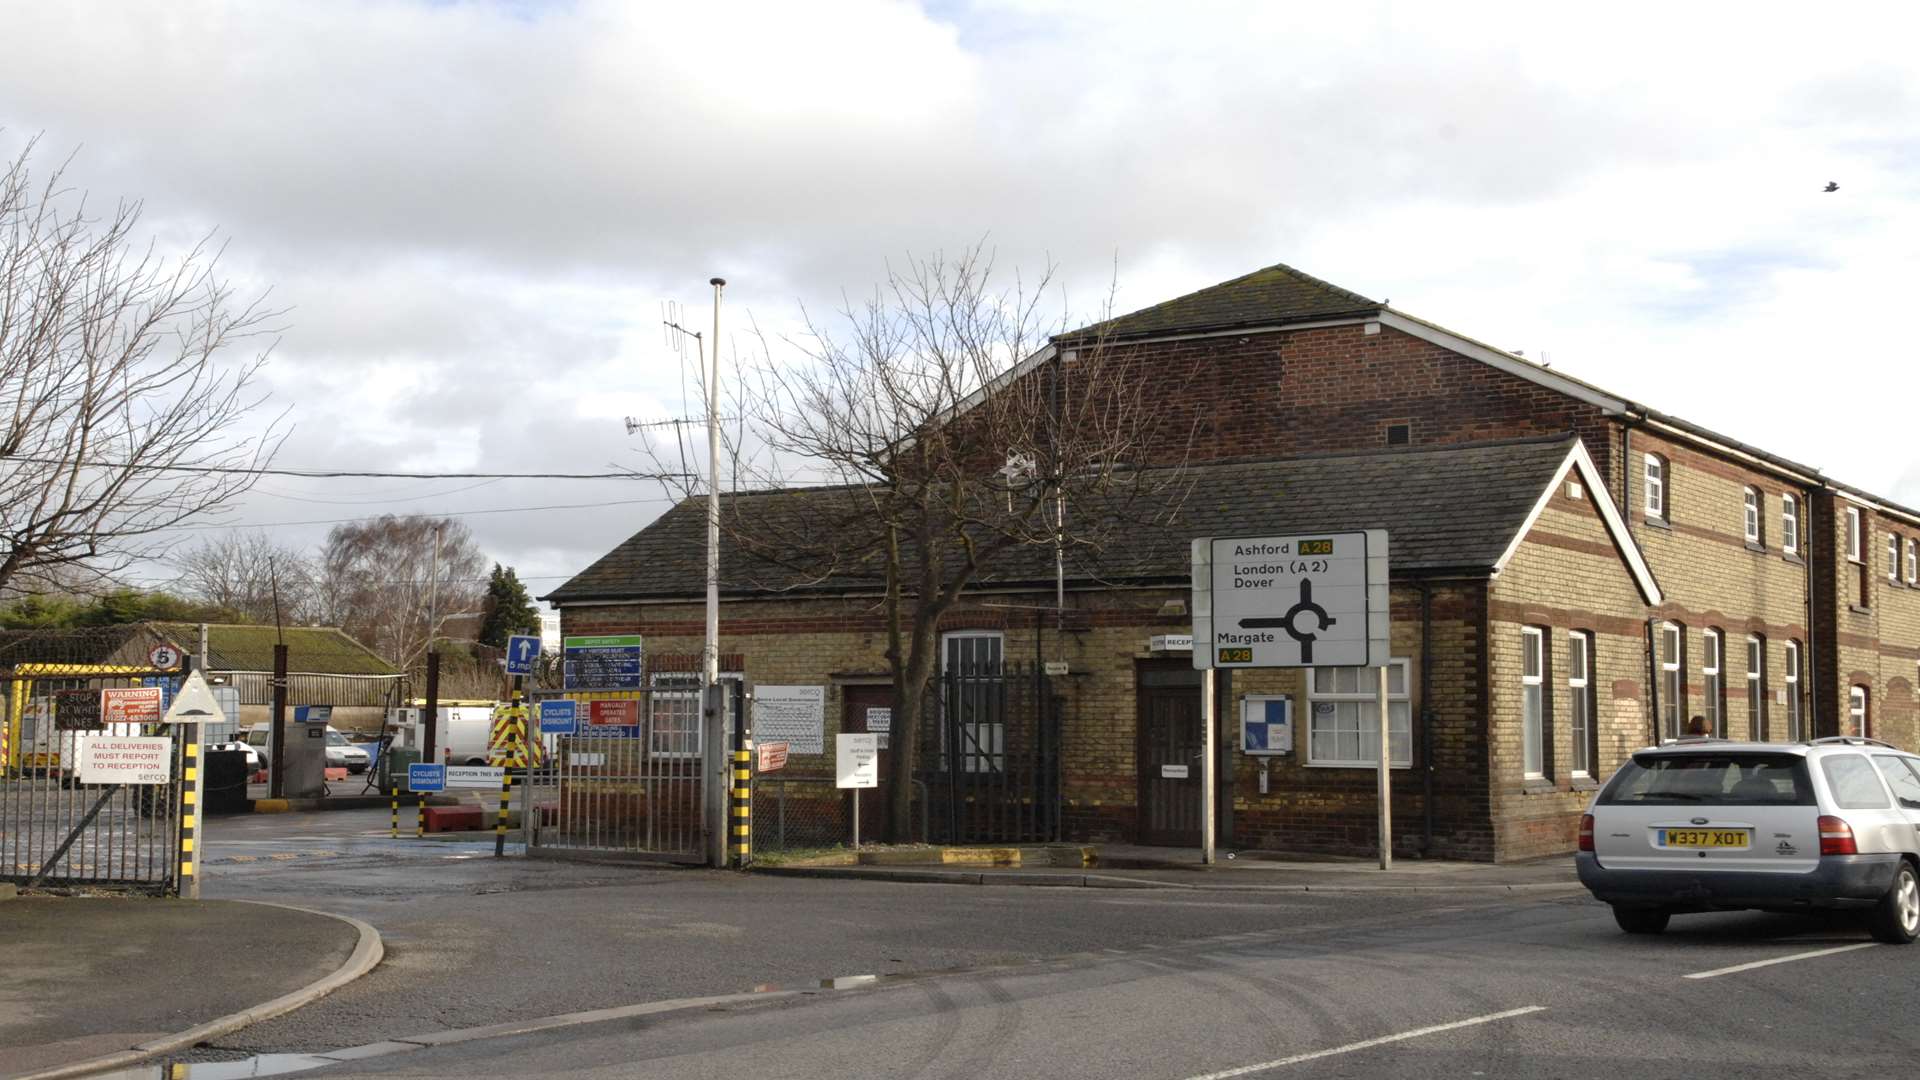 The former Serco depot is among the areas of Kingsmead which will be redeveloped.